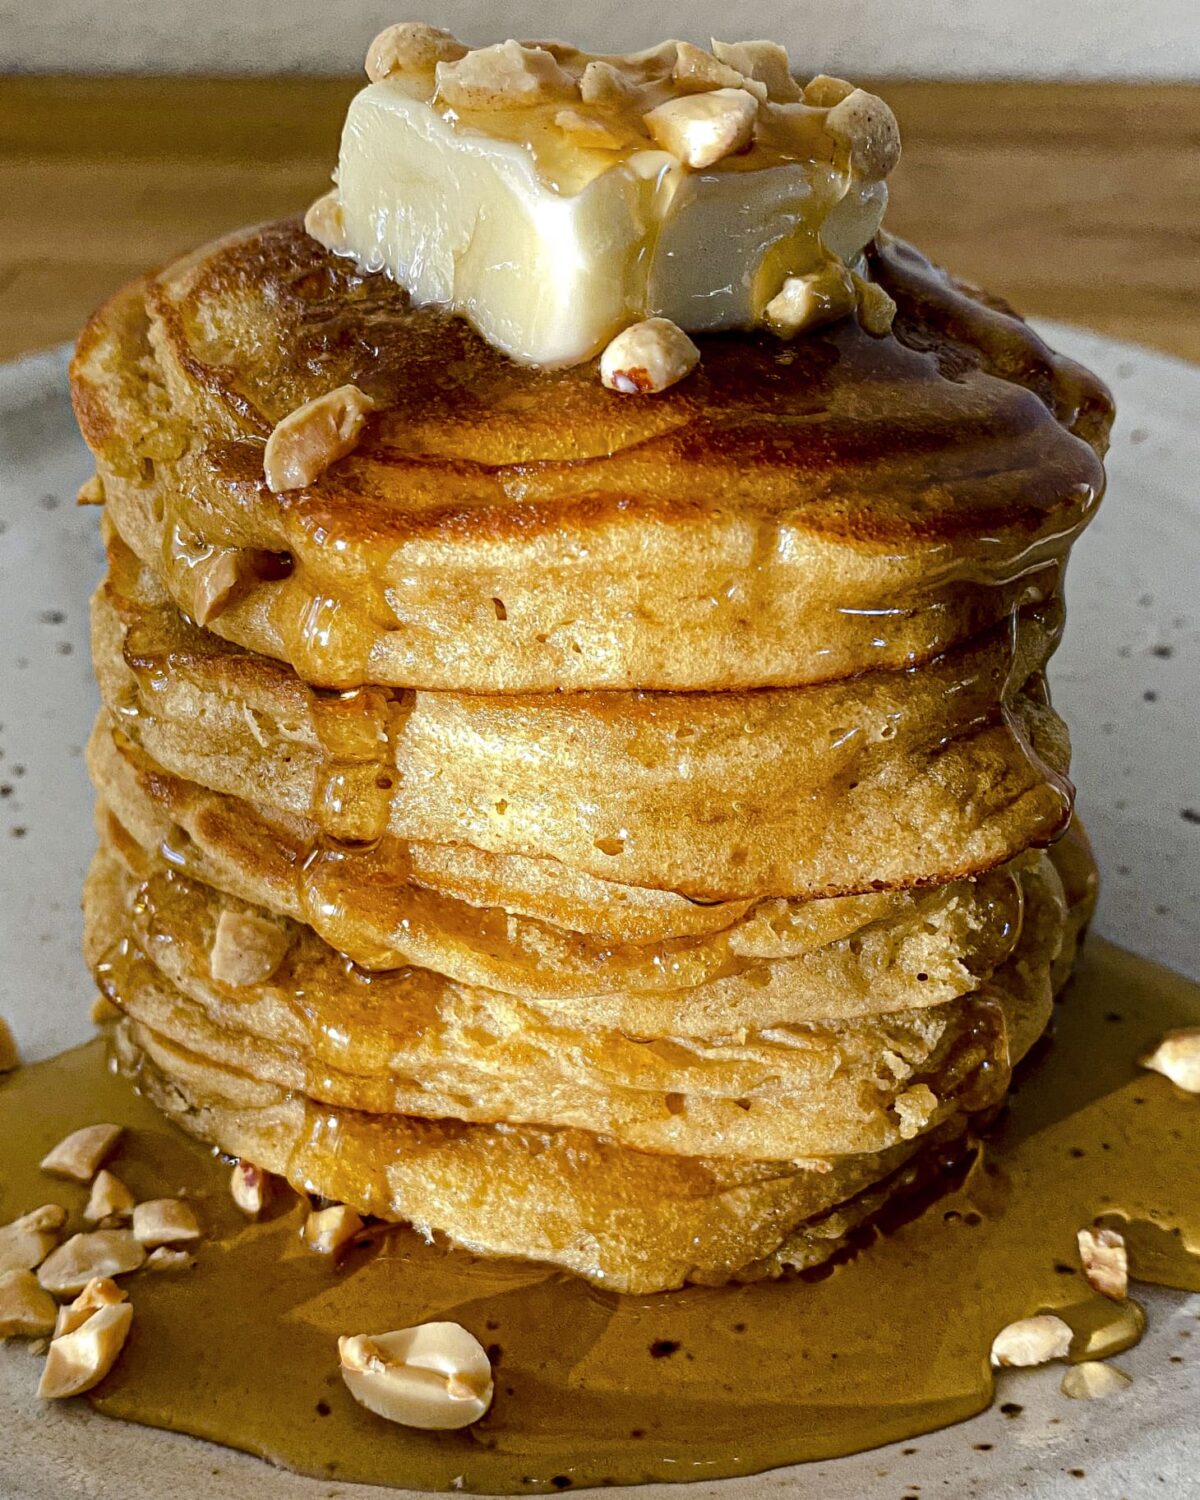 These pillowy pancakes are the perfect blend of sweet and salty. (Christopher Testani/TNS)